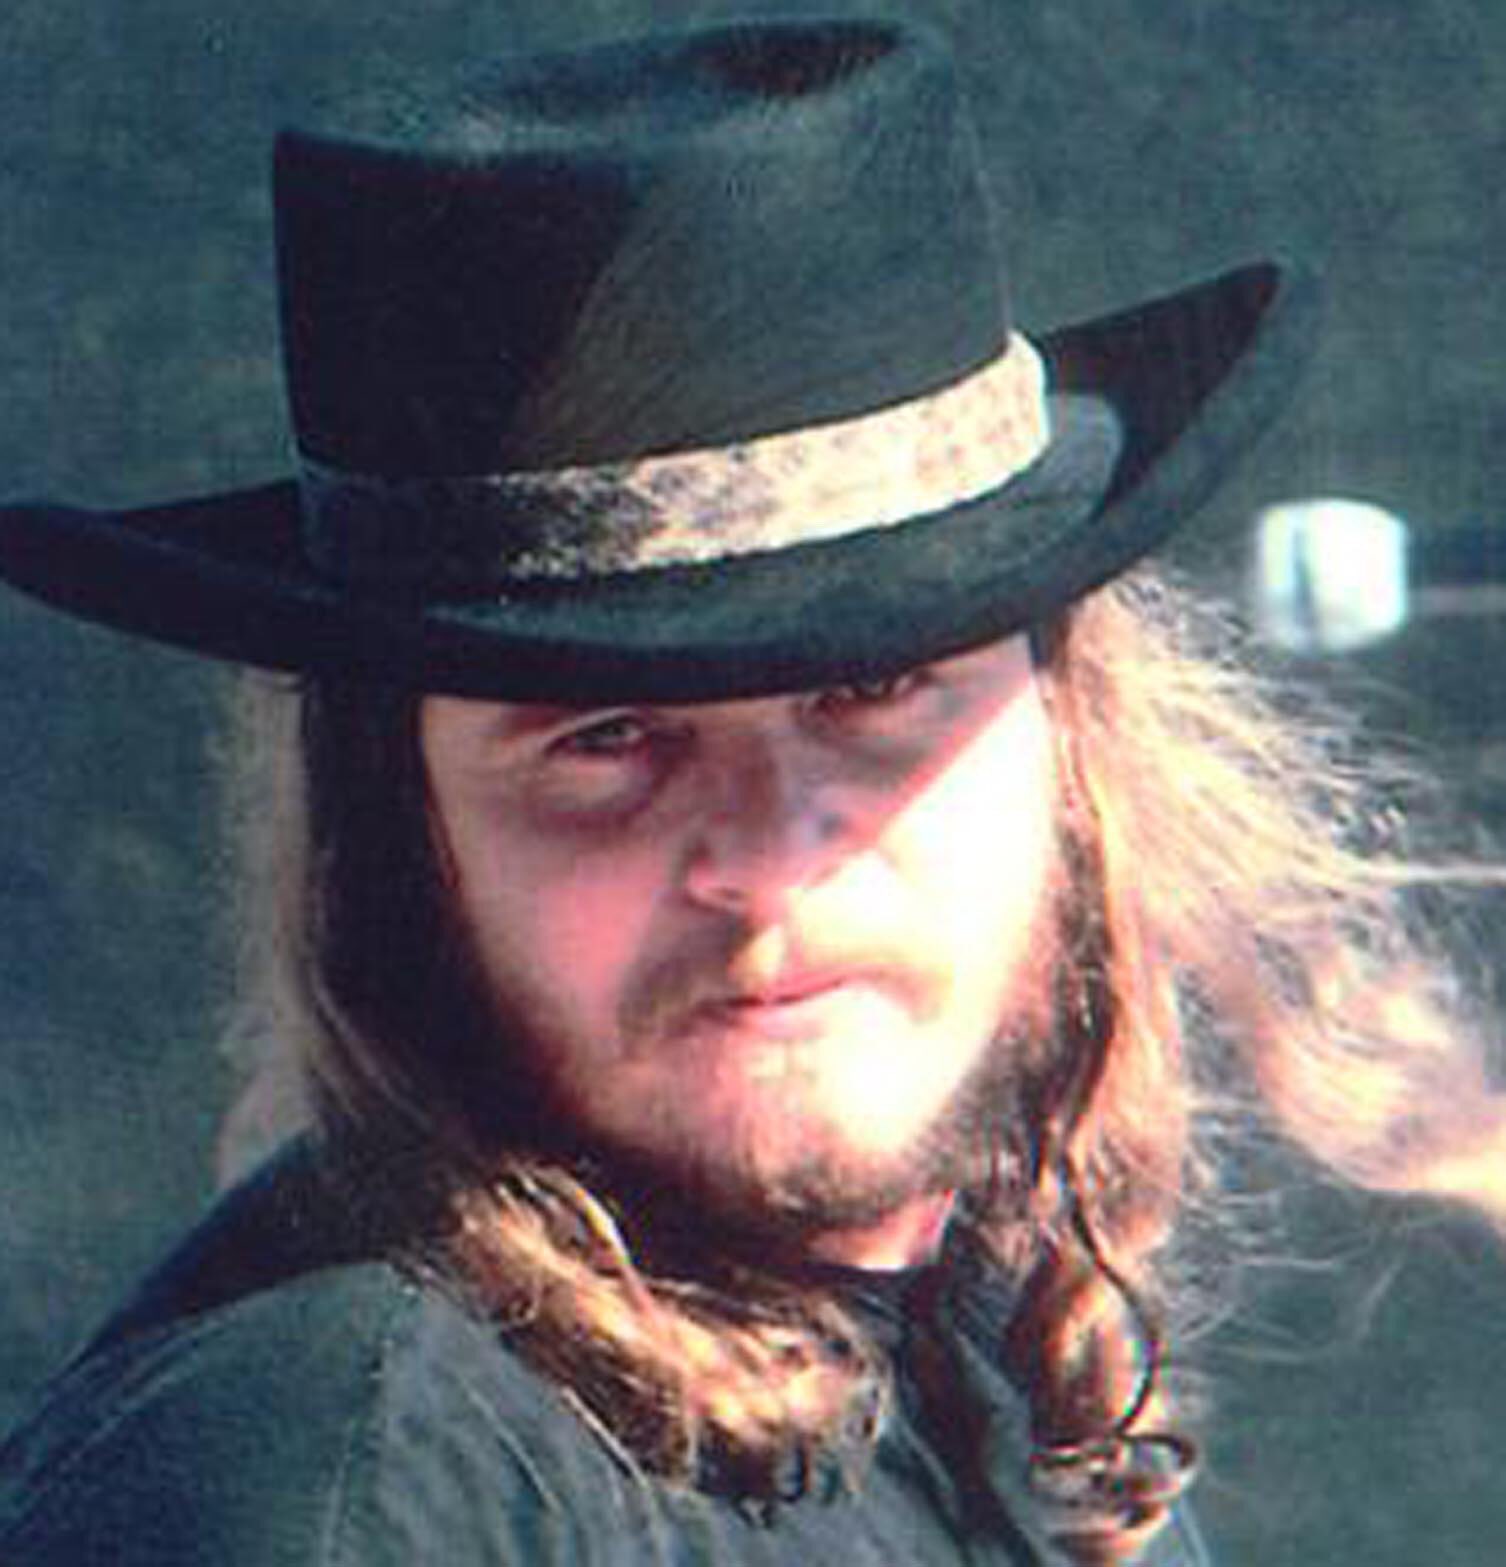 Happy Heavenly Birthday to one of my biggest musical influences! HBD Ronnie Van Zant! Fly High Freebird! 